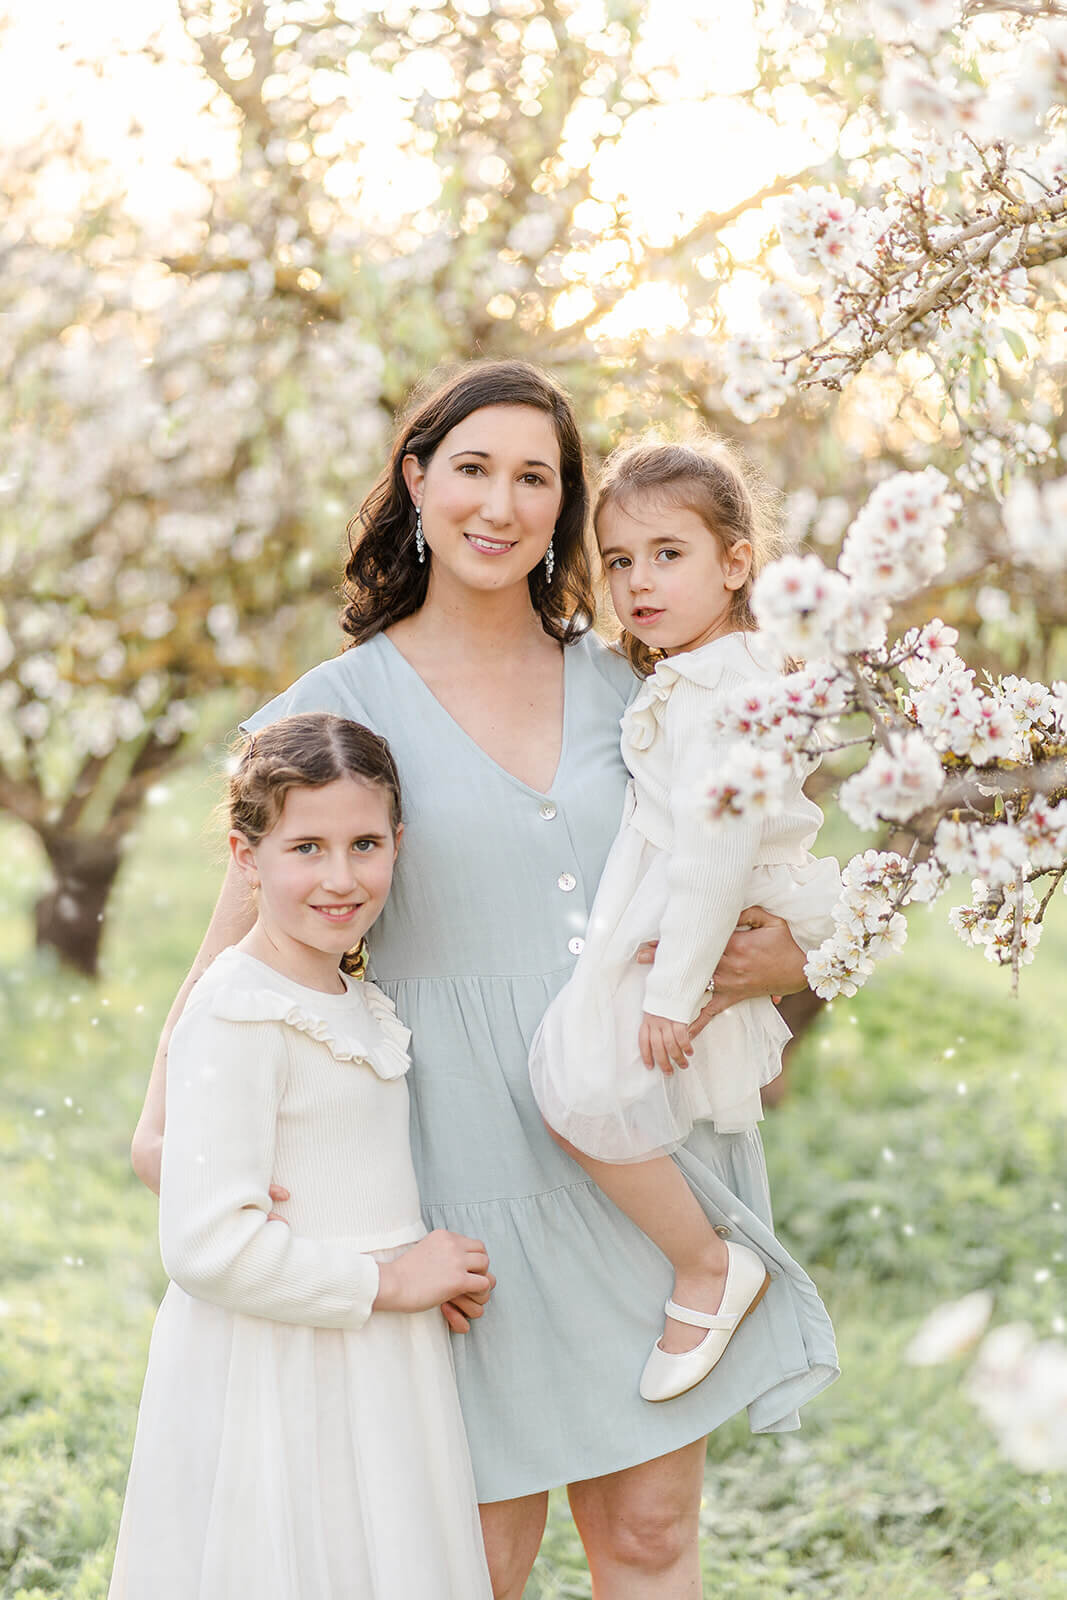 Nature's gift: Family portrait amidst blooming plum blossoms in Brisbane's springtime